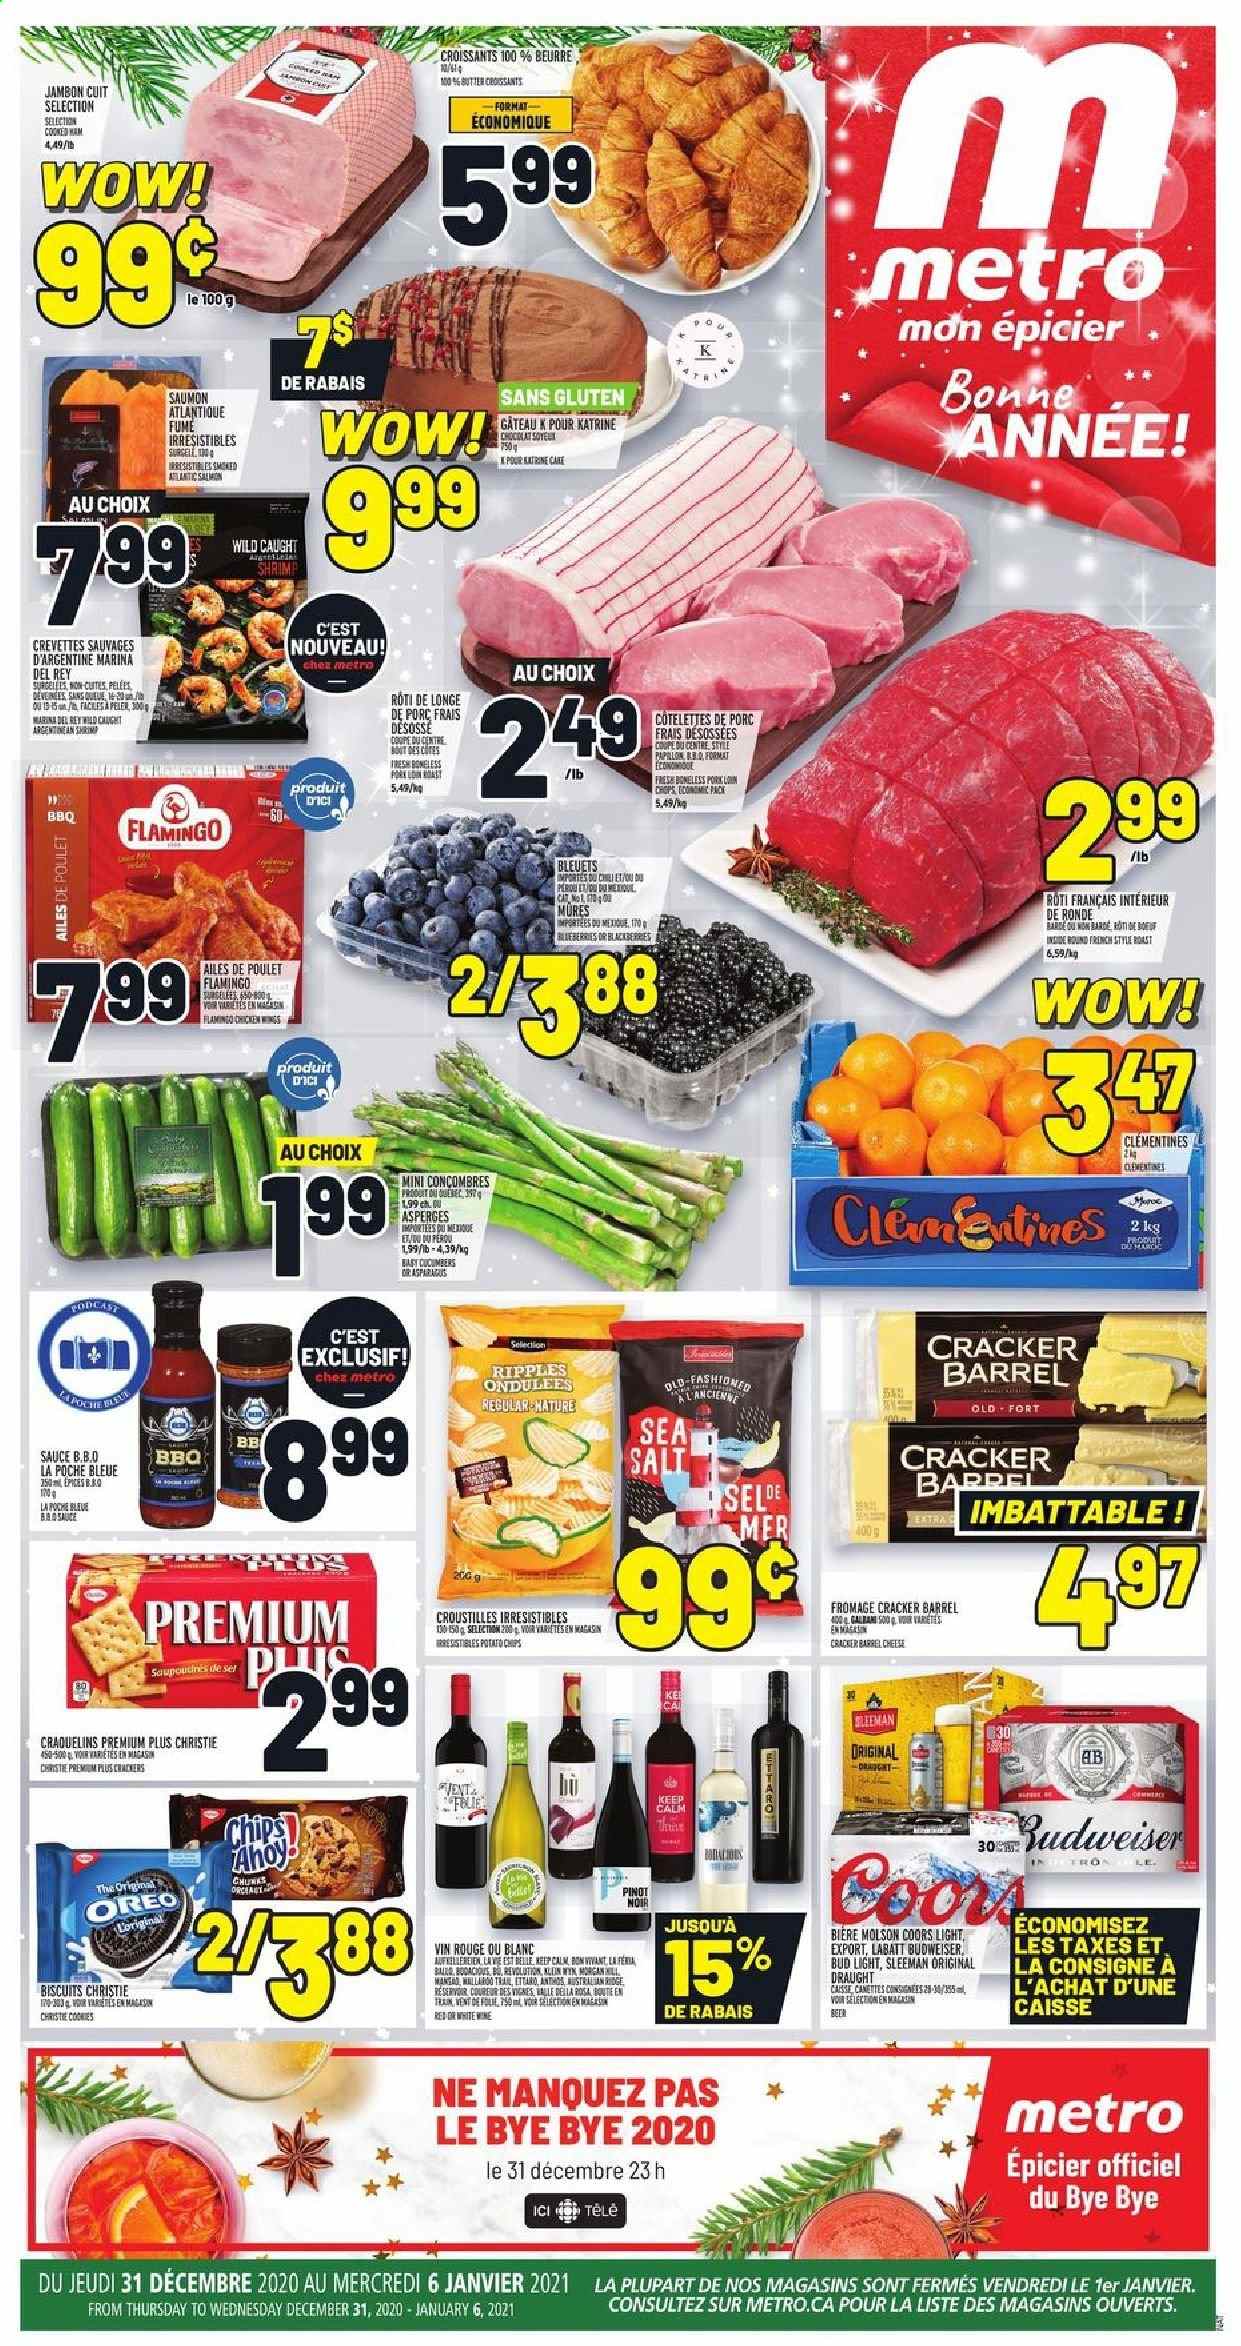 thumbnail - Metro Flyer - December 31, 2020 - January 06, 2021 - Sales products - cake, croissant, cucumber, blackberries, clementines, salmon, shrimps, sauce, ham, cheese, Galbani, crackers, biscuit, Pinot Noir, beer, Bud Light, Oreo, chips, Coors. Page 1.